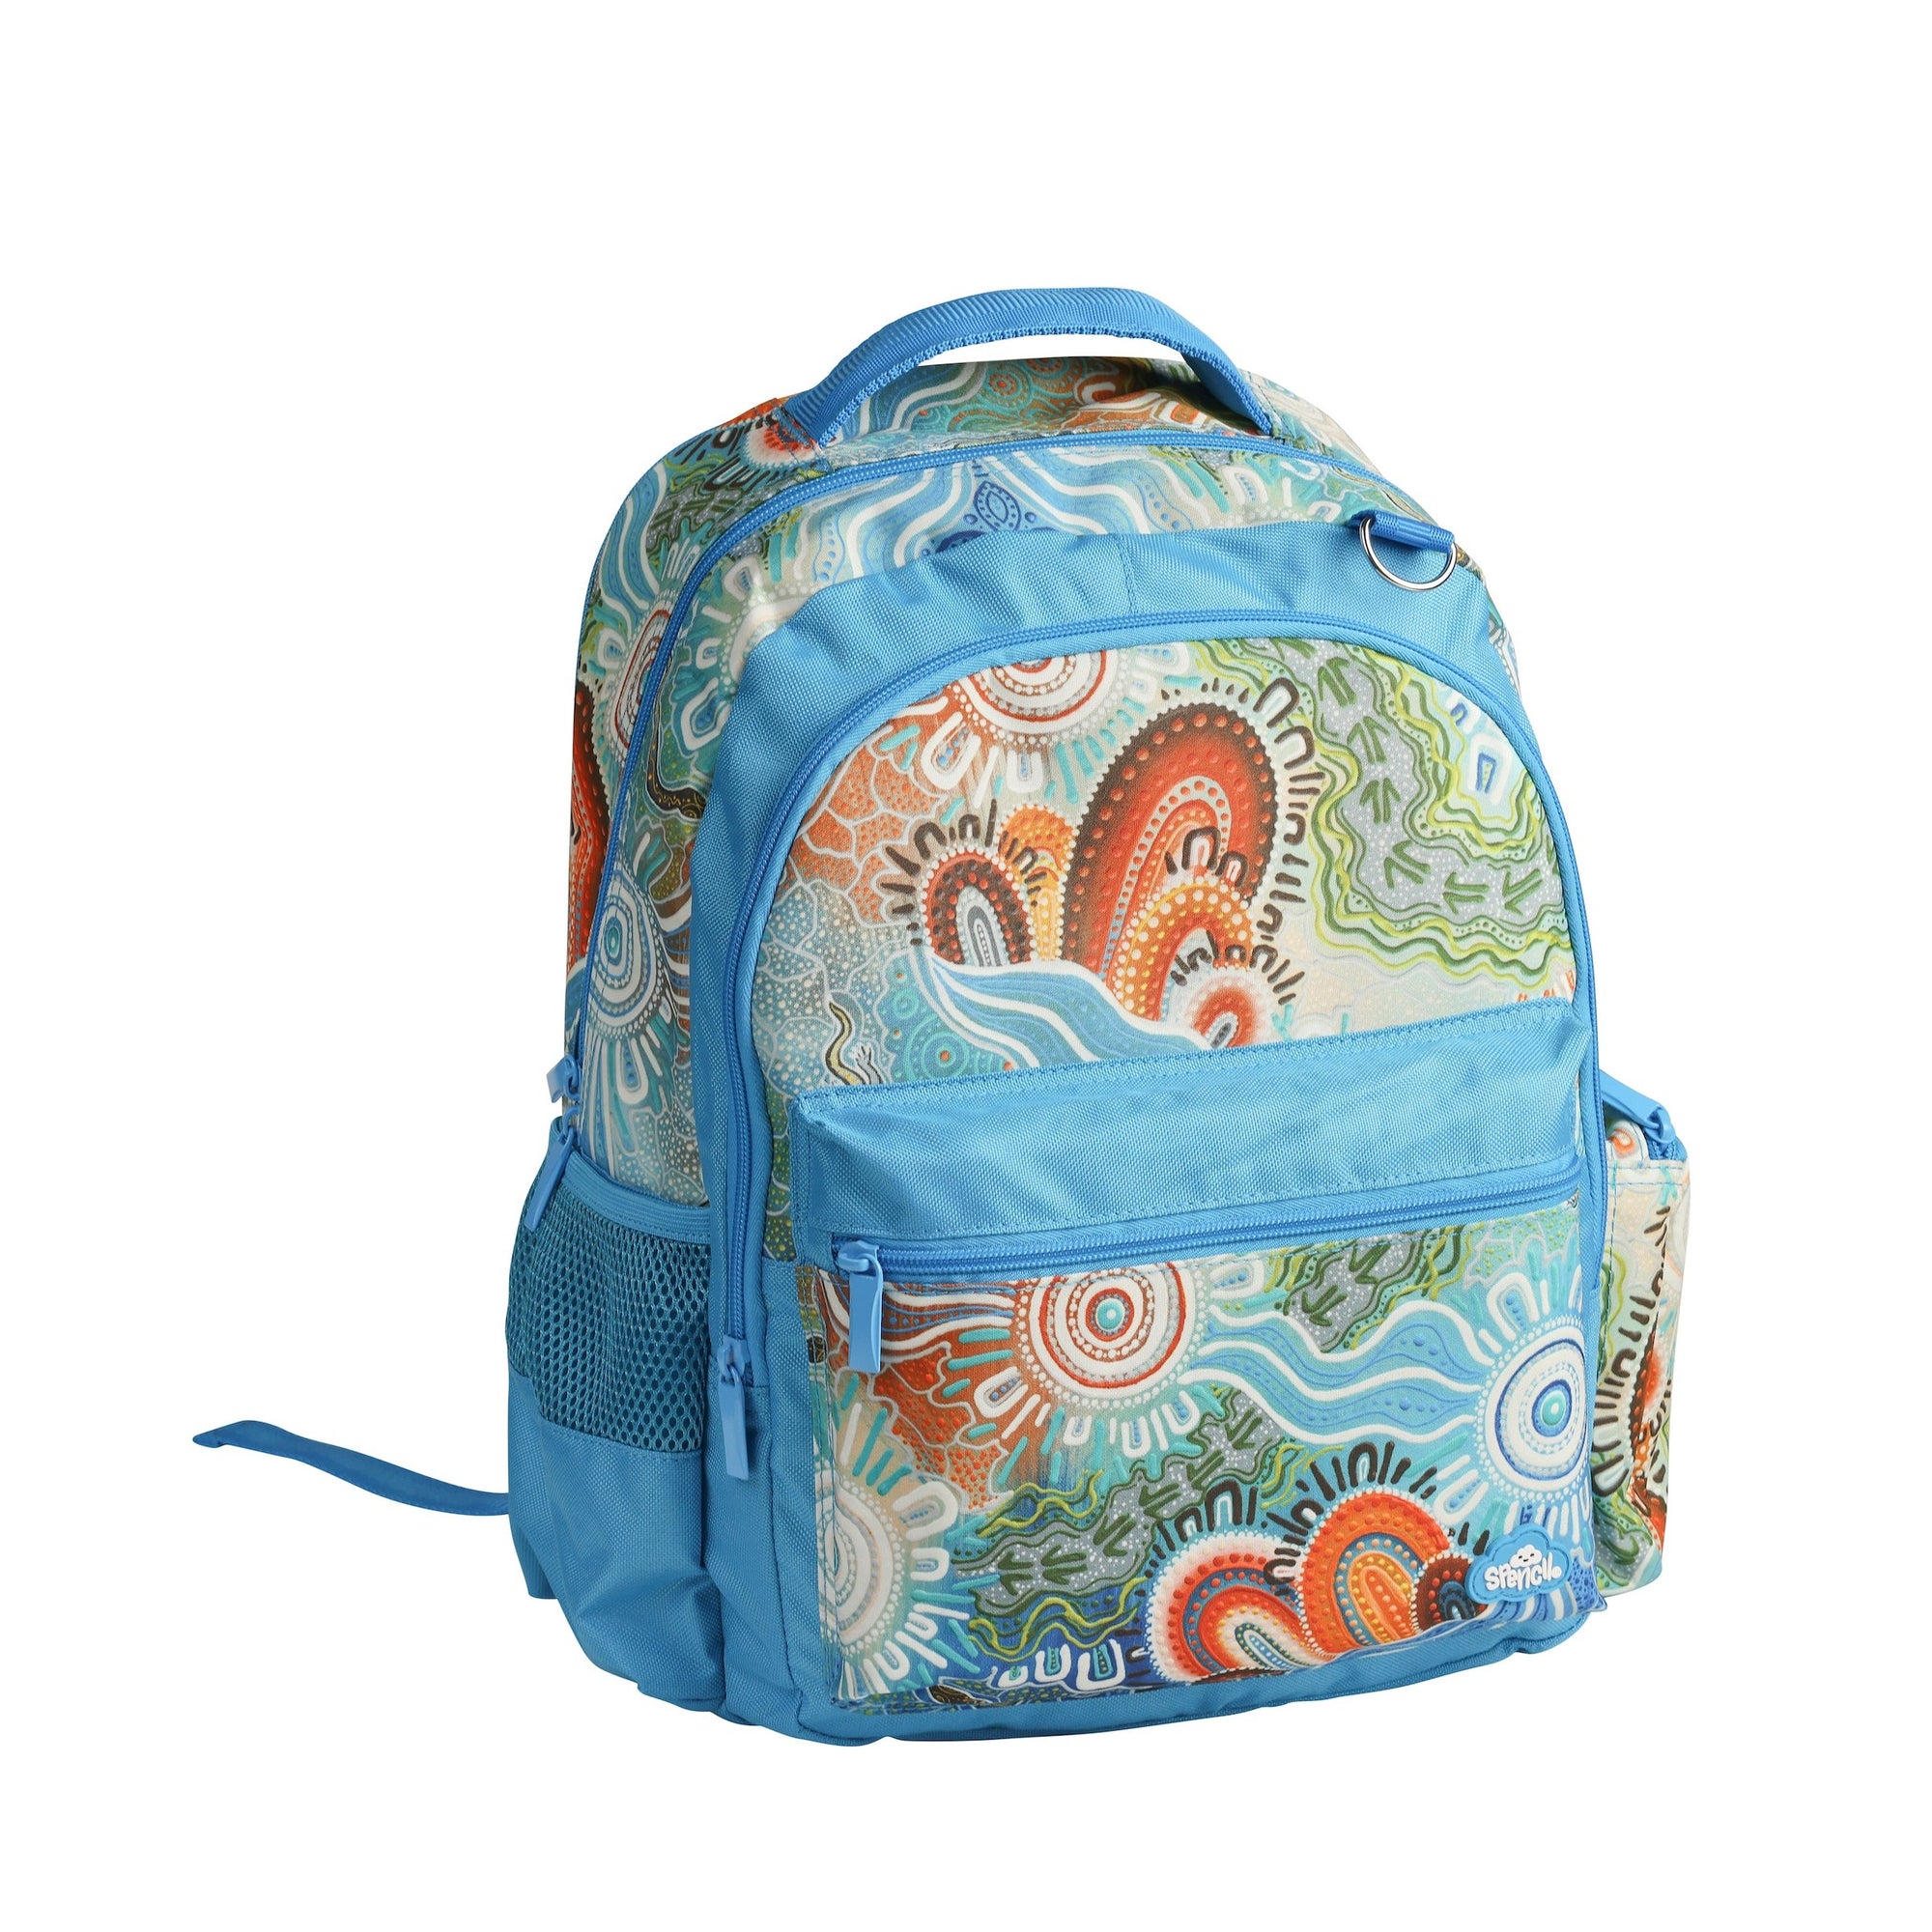 Spencil kids backpack - Angus and Dudley